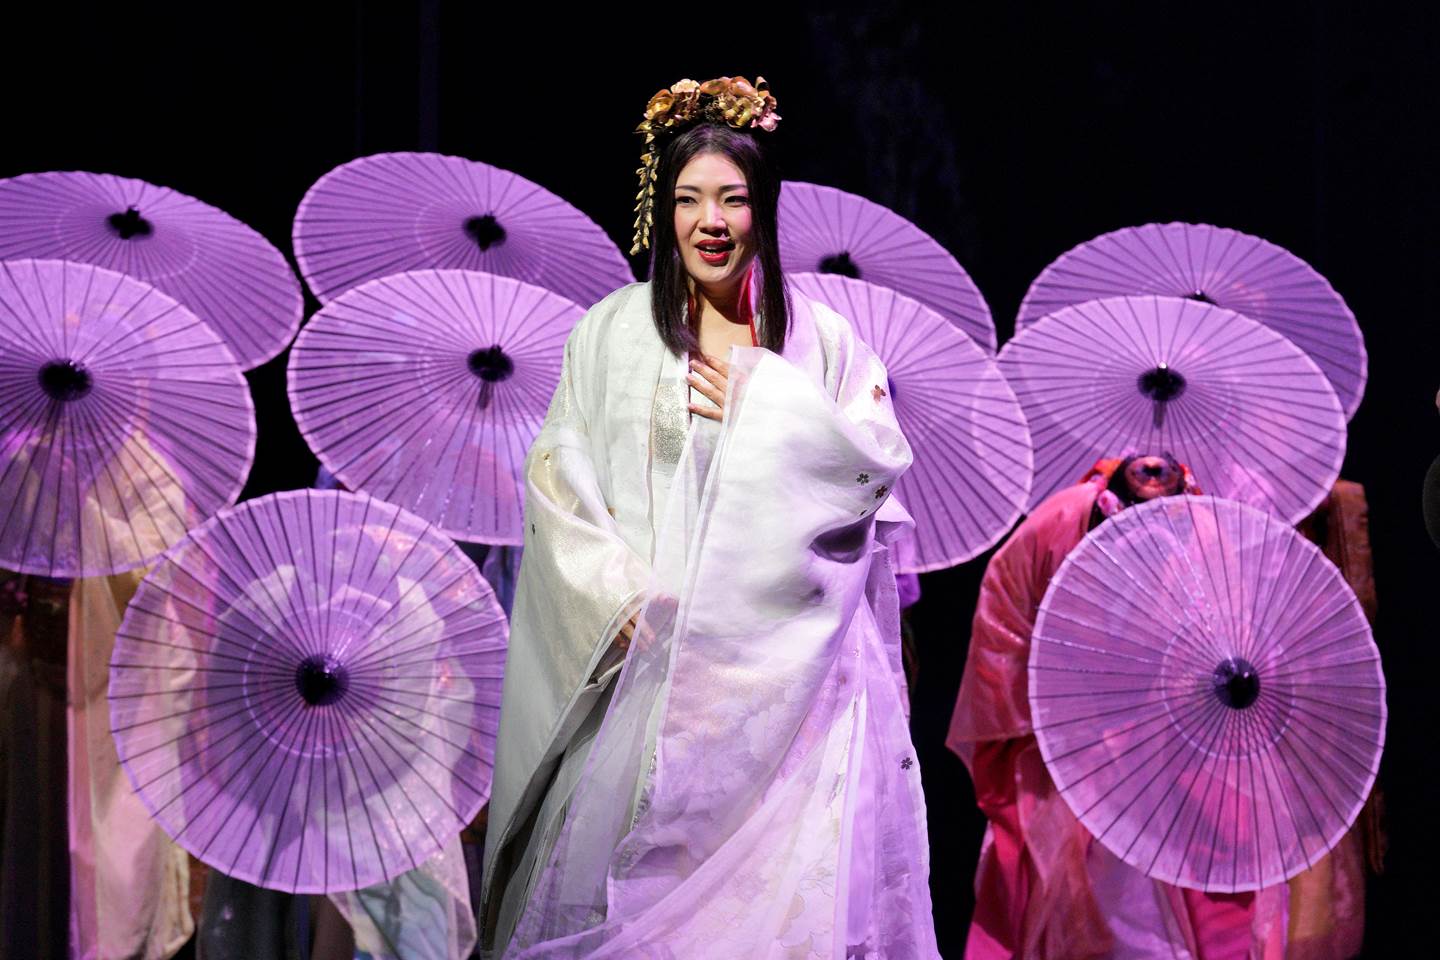 Madame Butterfly with cast behind her hiding behind purple parasols